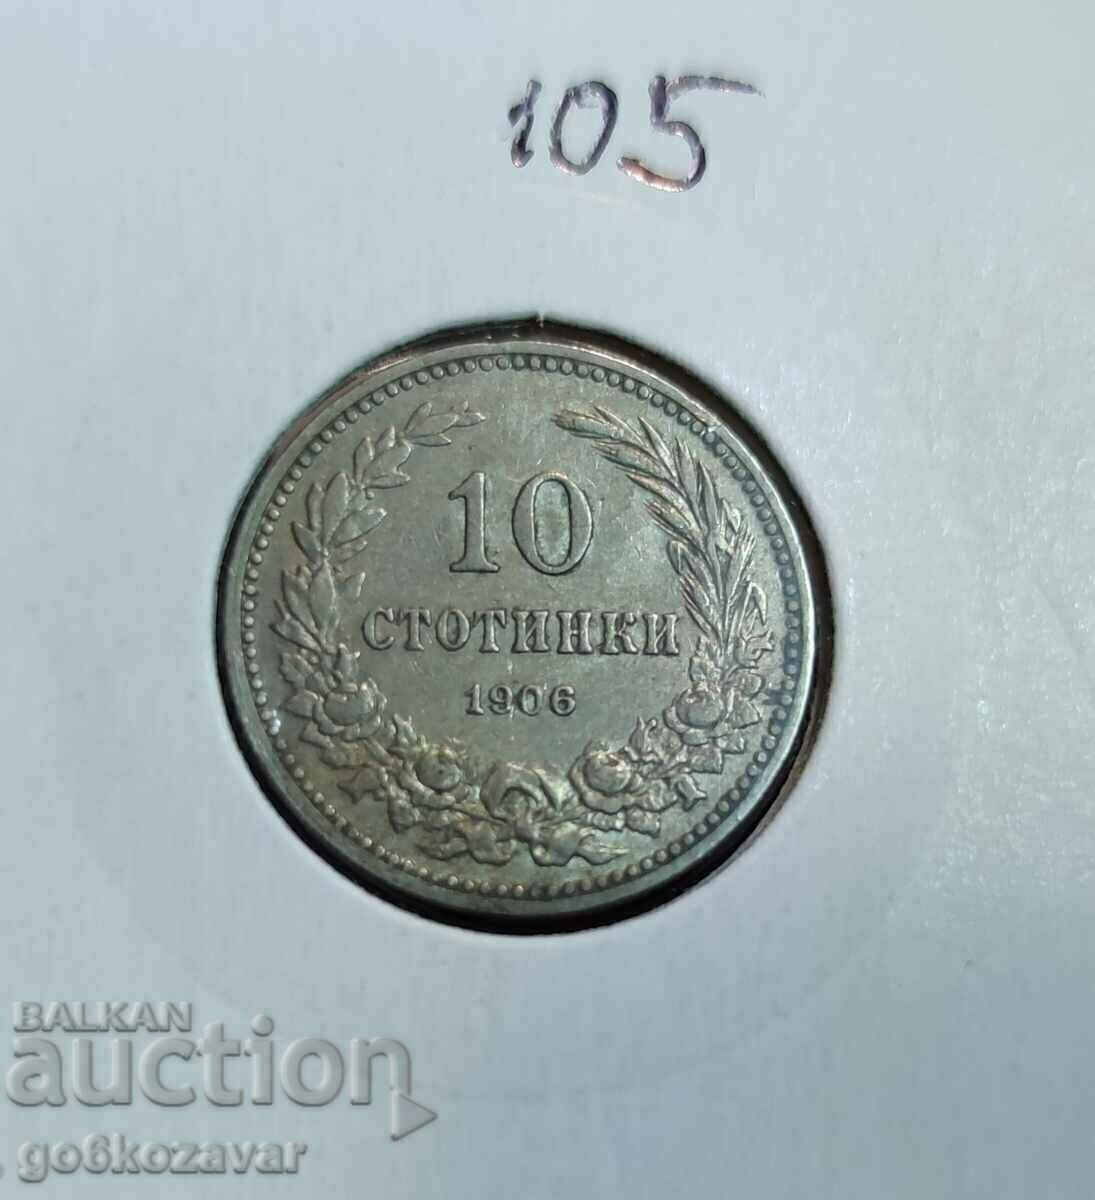 Bulgaria 10 cents 1906 Excellent! Collection!